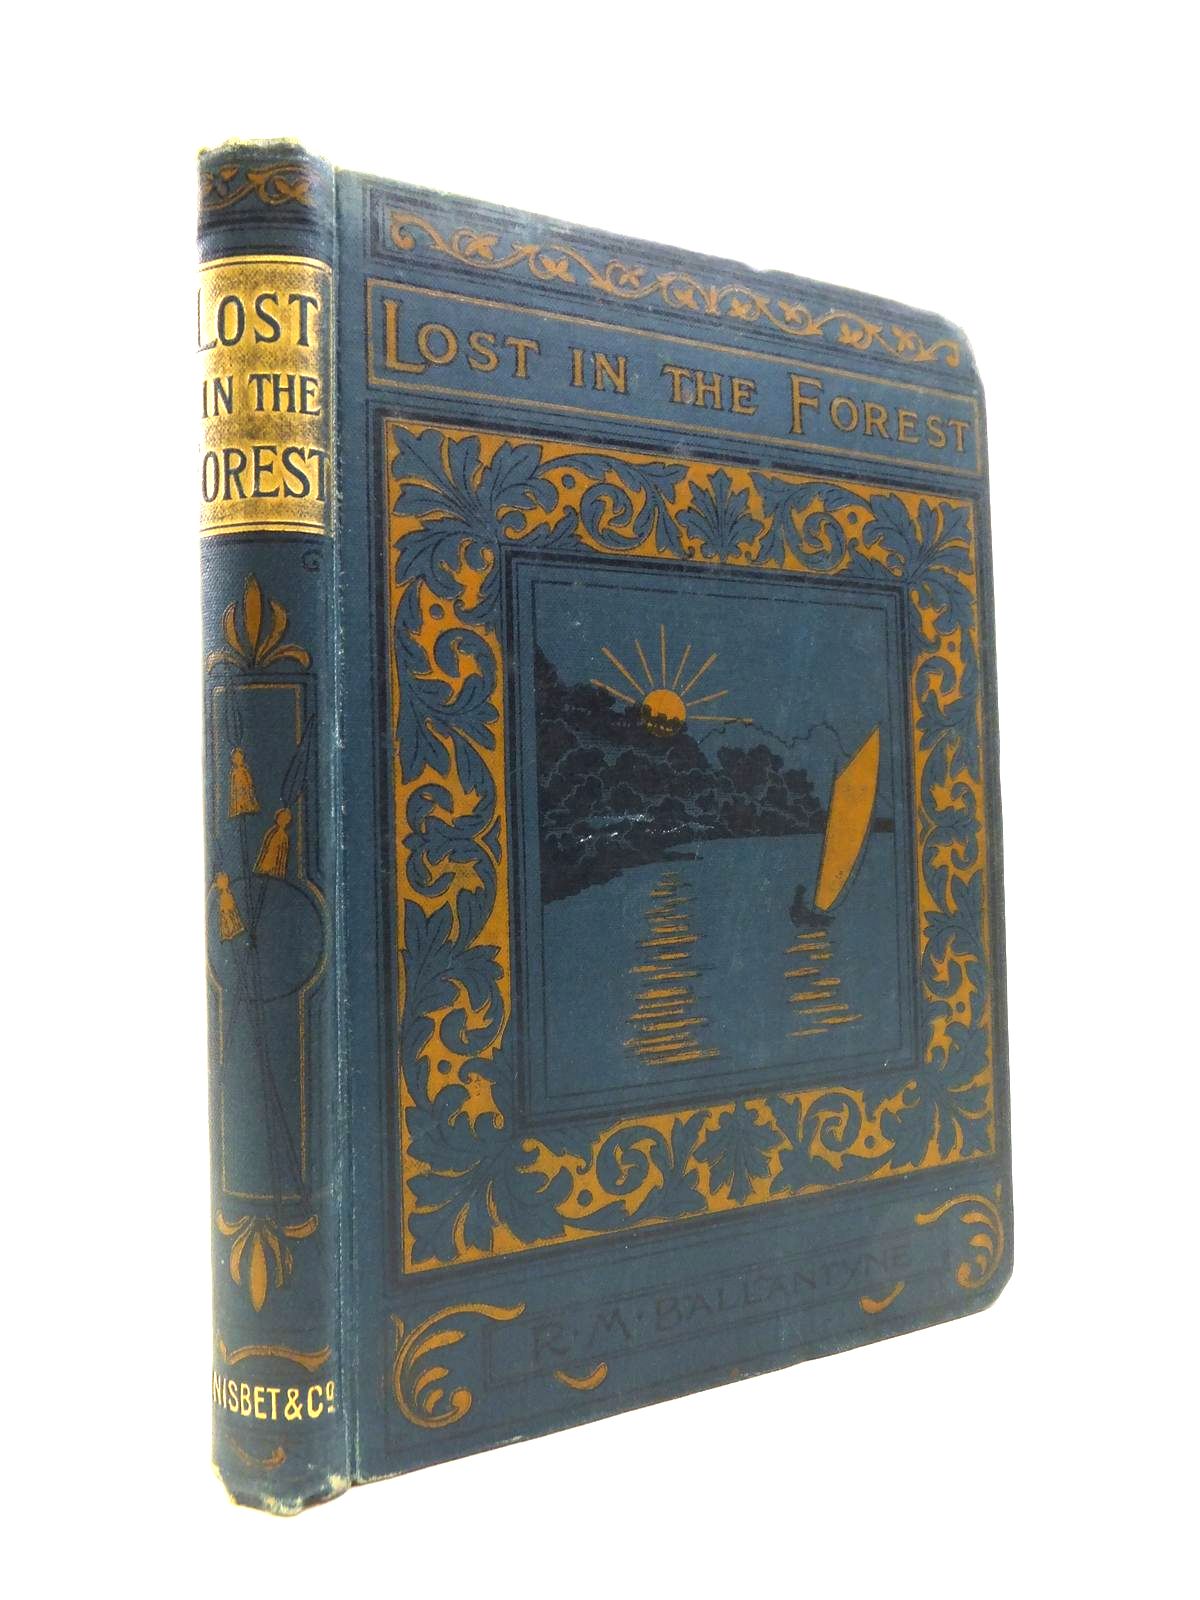 Photo of LOST IN THE FOREST written by Ballantyne, R.M. illustrated by Hewerdine, Matt B. published by James Nisbet & Co. Limited (STOCK CODE: 1208220)  for sale by Stella & Rose's Books